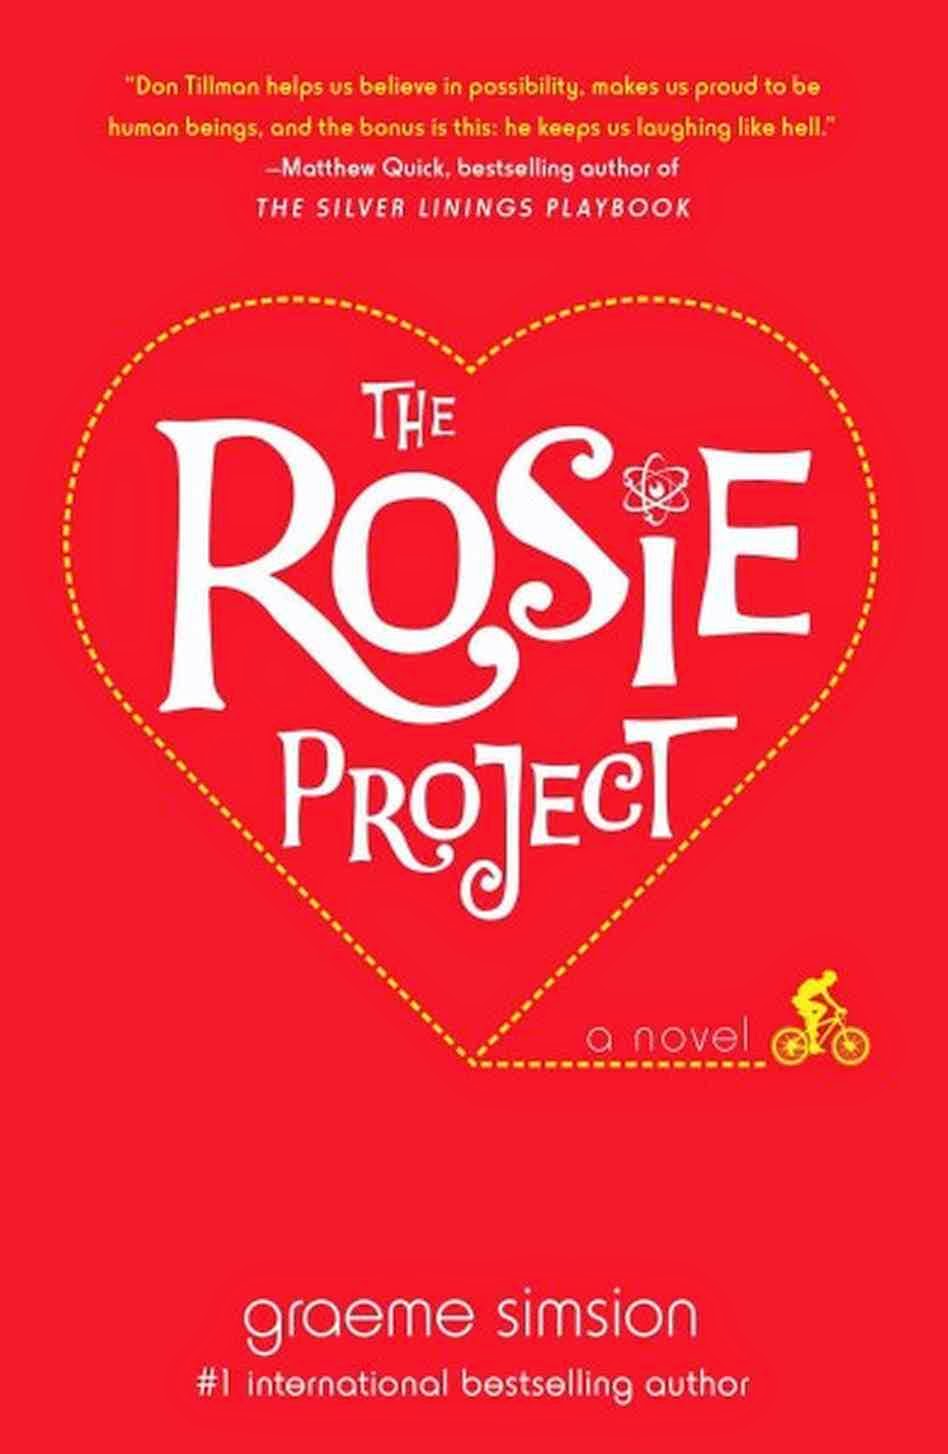 https://www.goodreads.com/book/show/16181775-the-rosie-project?from_search=true